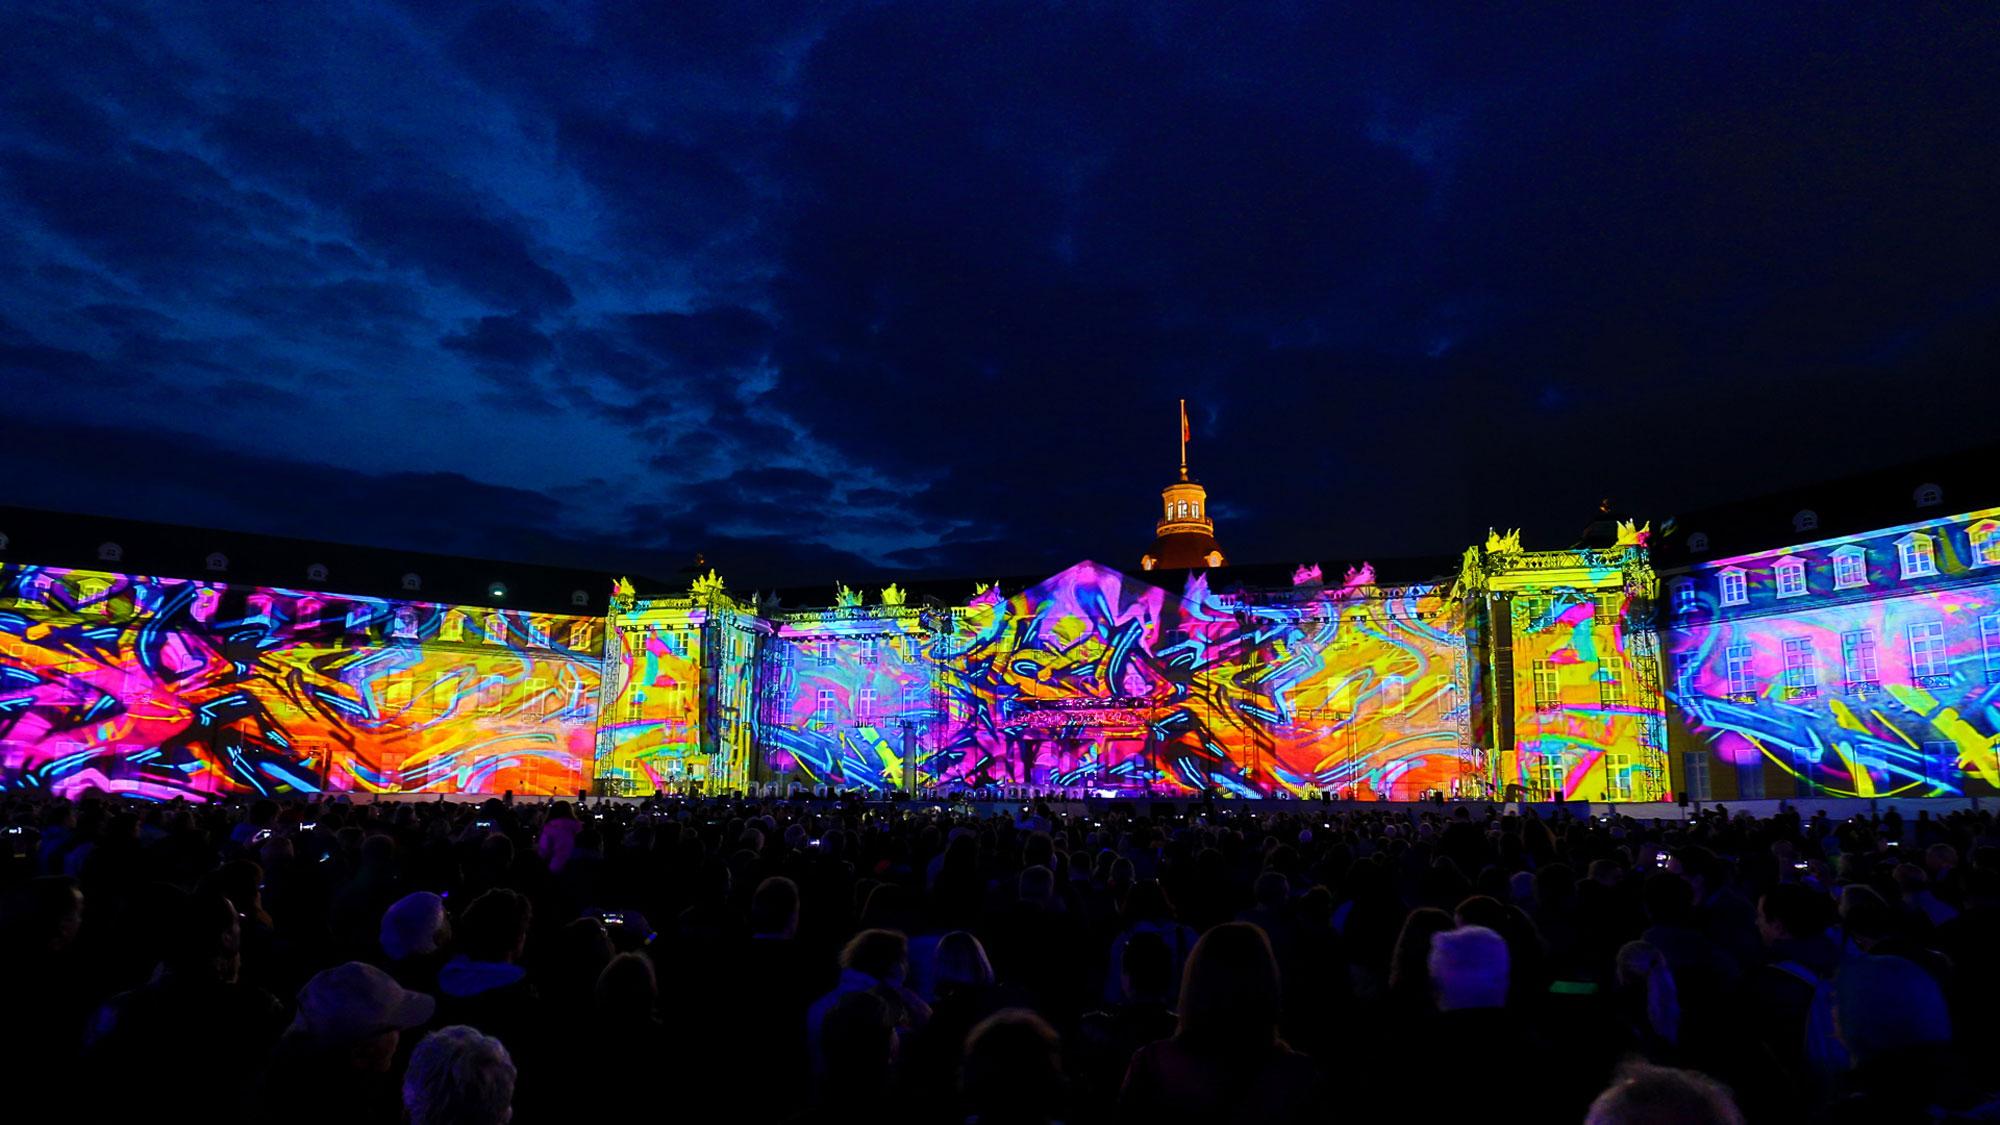 Projection mapping of bright neon graffiti patterns on a building. A sea of people looks on.